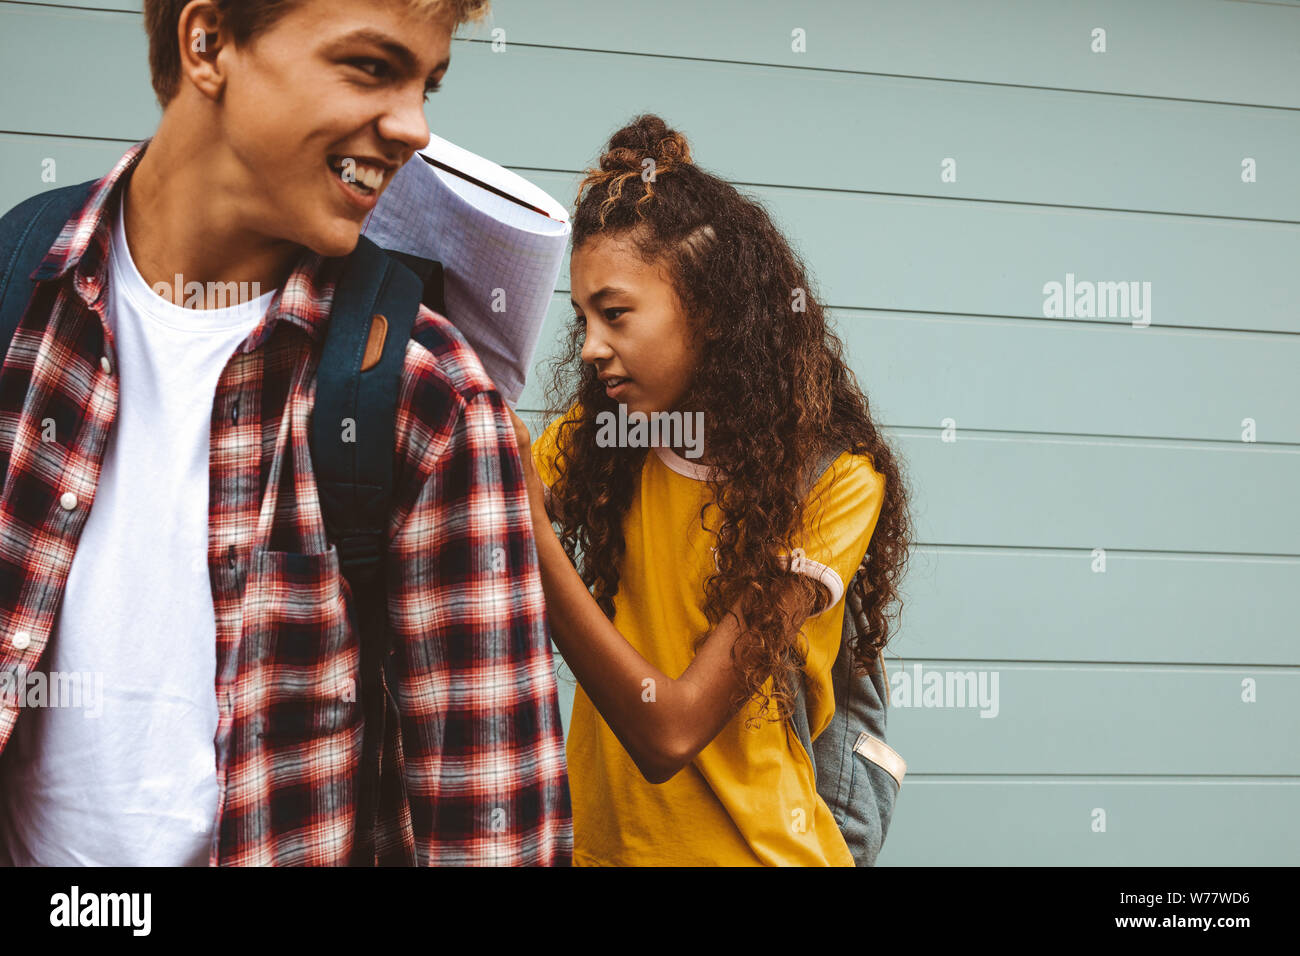 Close up of teenage friends standing outdoors wearing college bags. Girl writing in a book keeping it on the back of her friend for support. Stock Photo